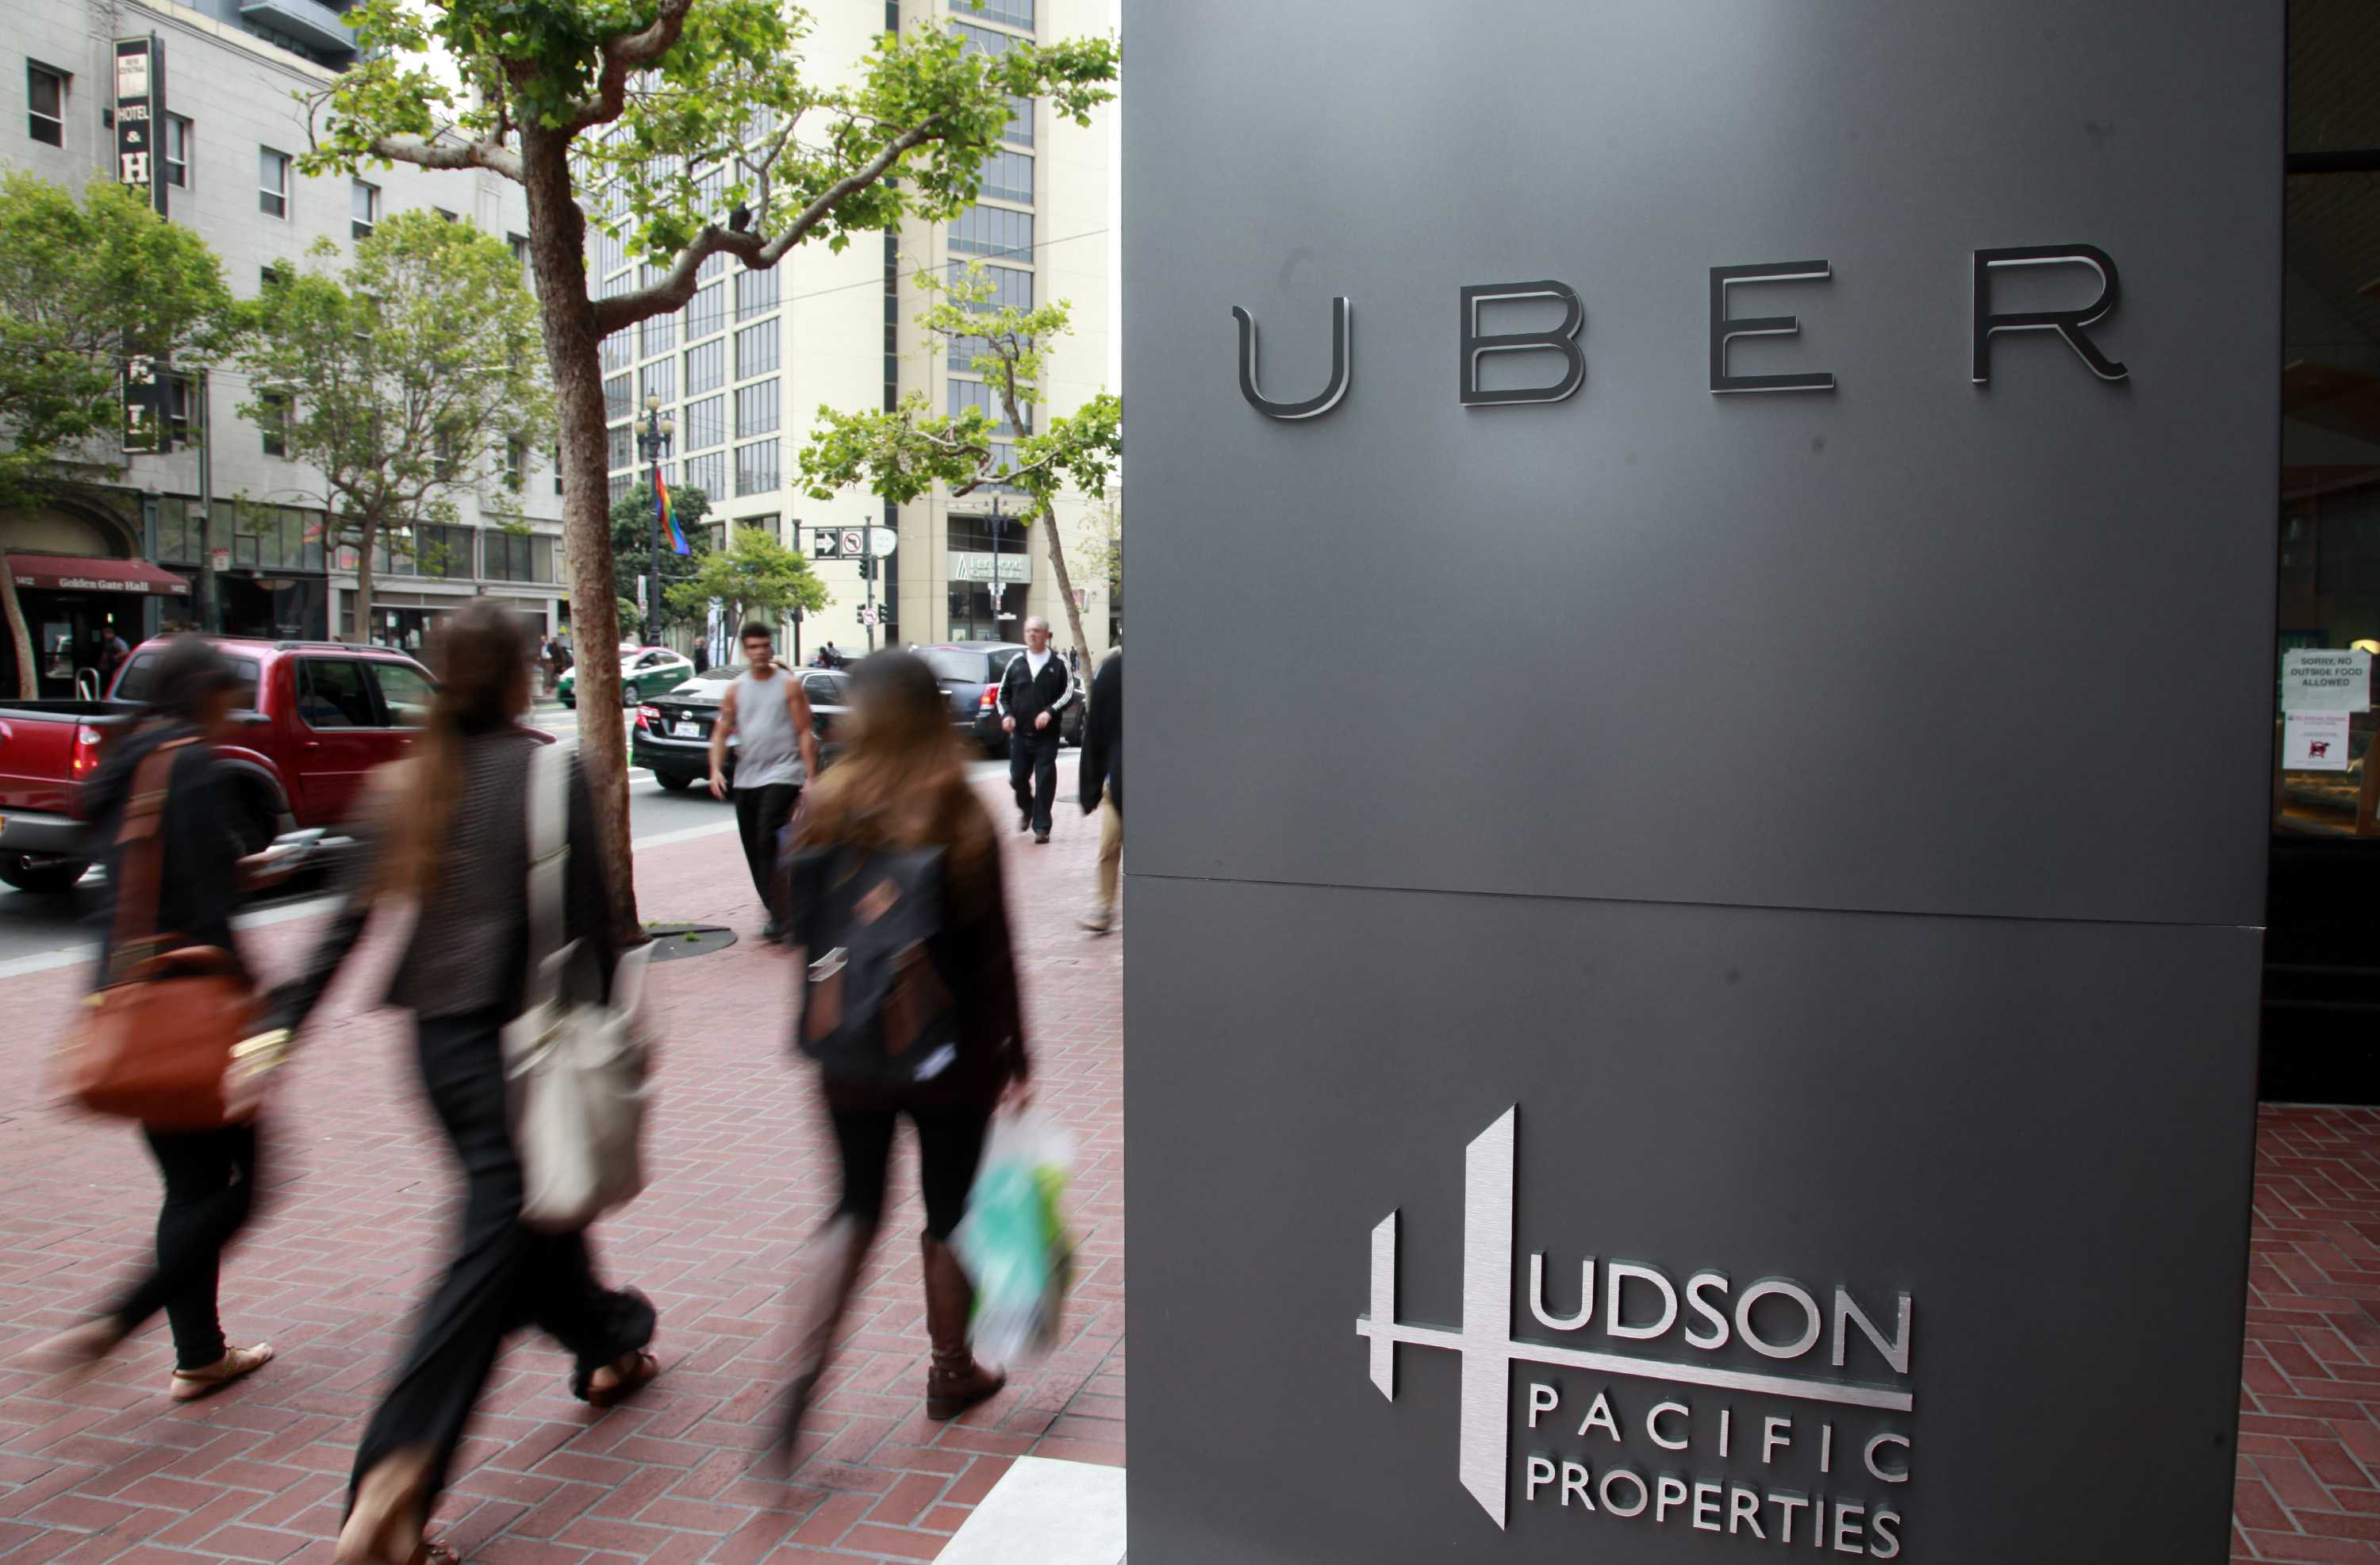 Foot traffic streams past Uber offices on Market Street Monday evening, June 2, 2014 in San Francisco, Calif. The urban tech boom is transforming much the long-blighted mid-Market area. (Karl Mondon/Bay Area News Group/TNS)